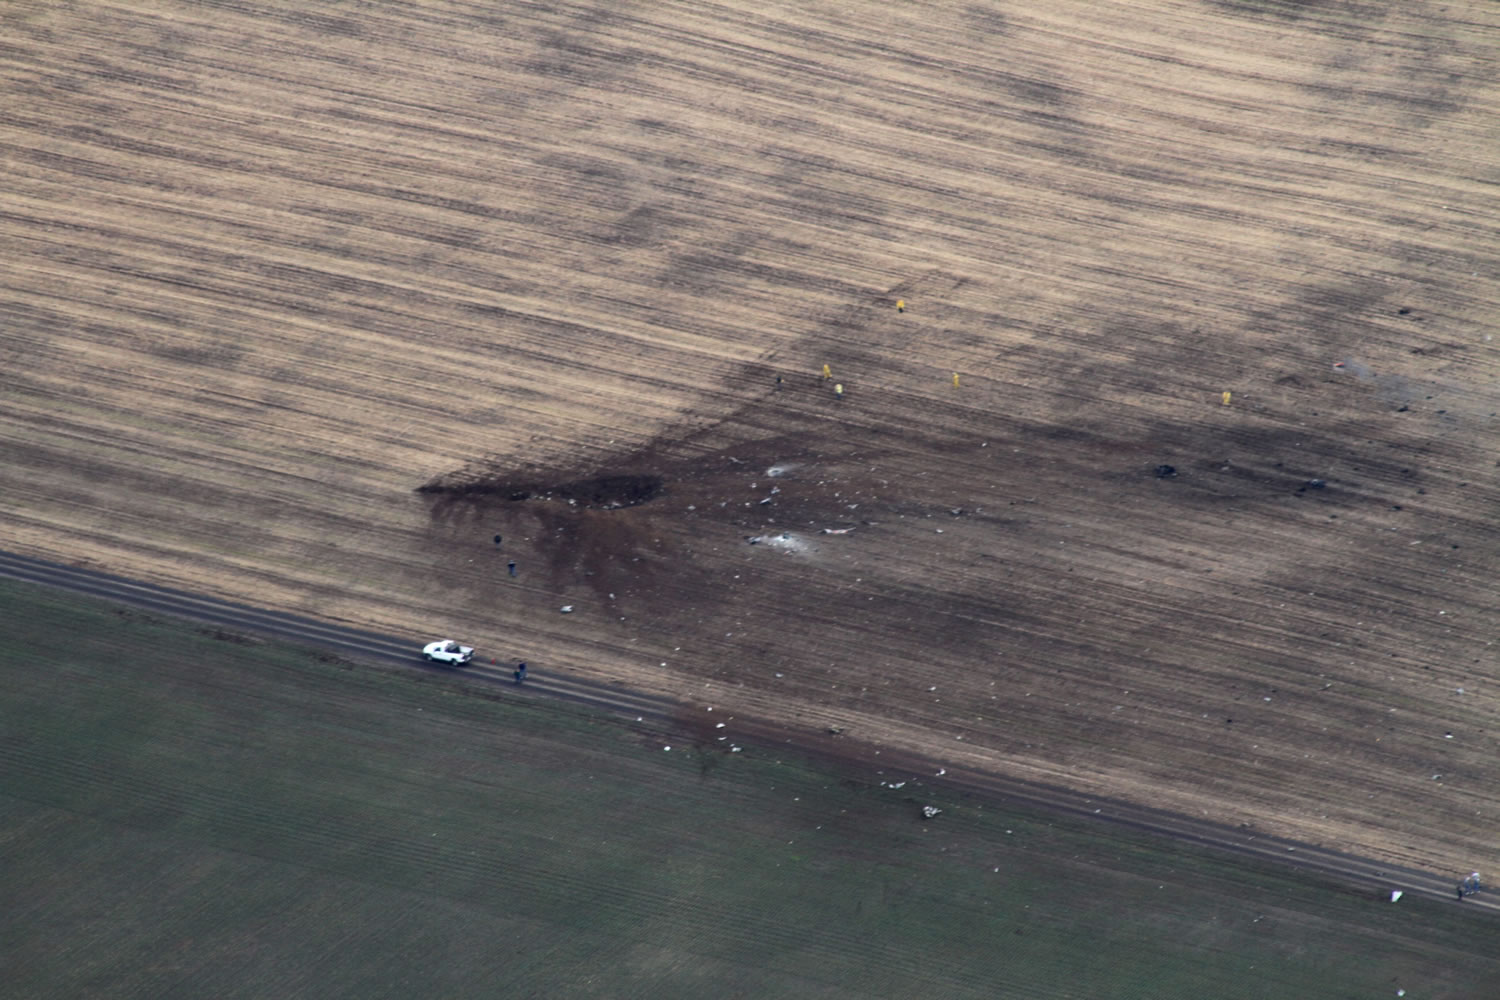 The U.S. Navy on Tuesday identified the three crew members aboard an E/A-6B Prowler military airplane who died when it crashed Monday in this field near Harrington, about 50 miles west of Spokane.